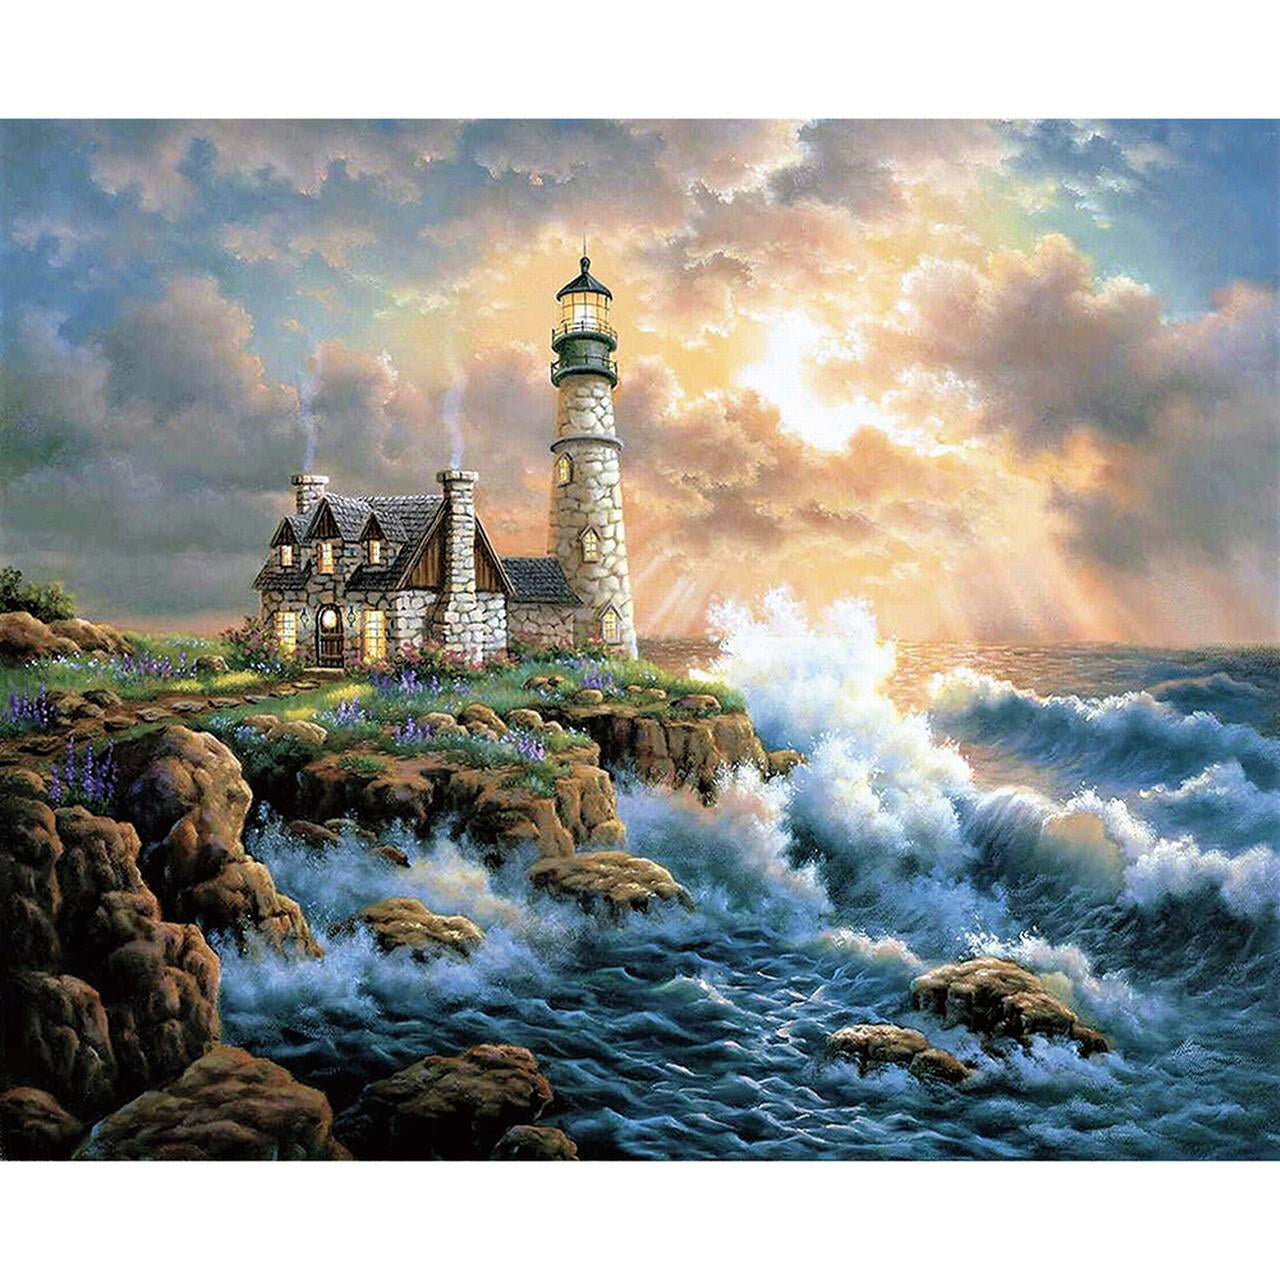 DIY 5D Diamond Painting Kits for Adults Full Drill Lighthouse Diamond Art Kit Cross Stitch Crafts Art for Home Decor Living Room Canvas Rhinestone Bead Embroidery 11.8 X 15.7 Inch 